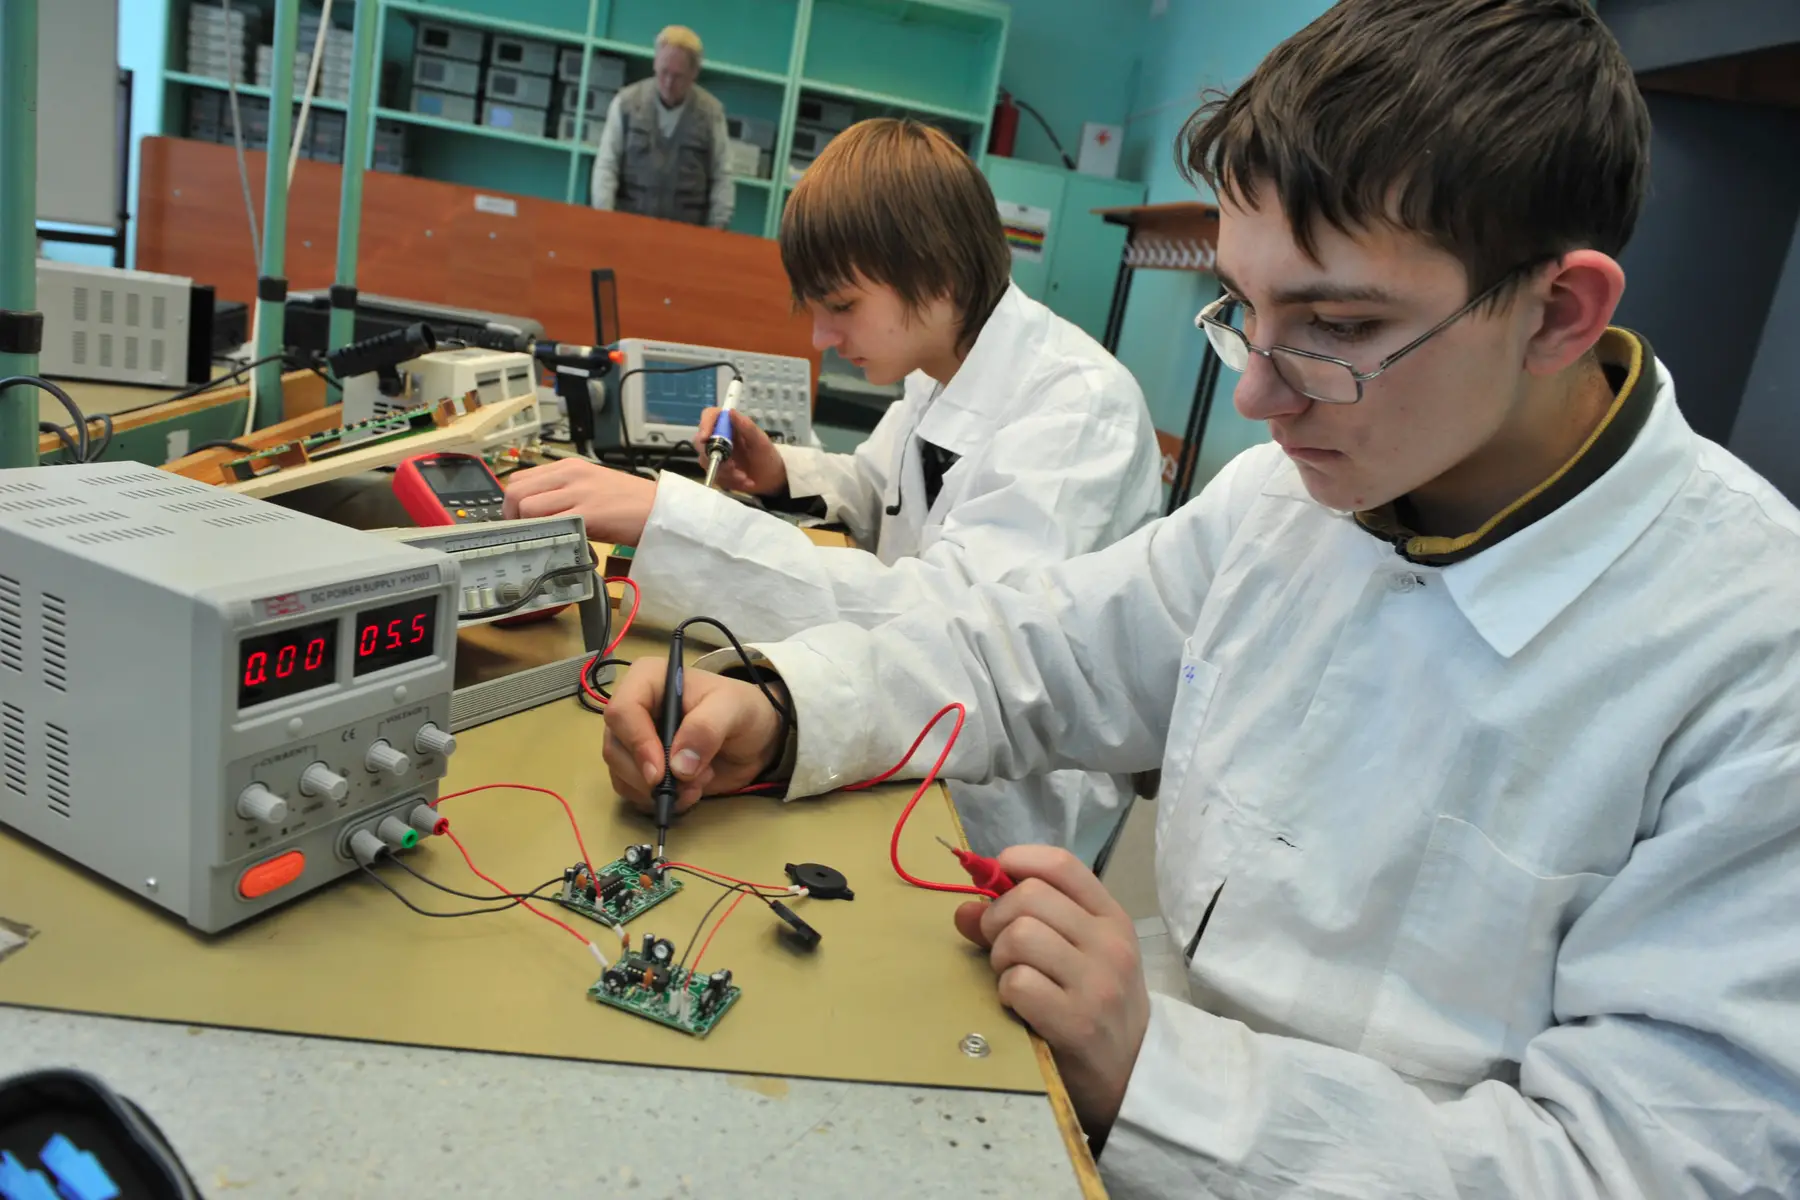 Students at a vocational school in Russia